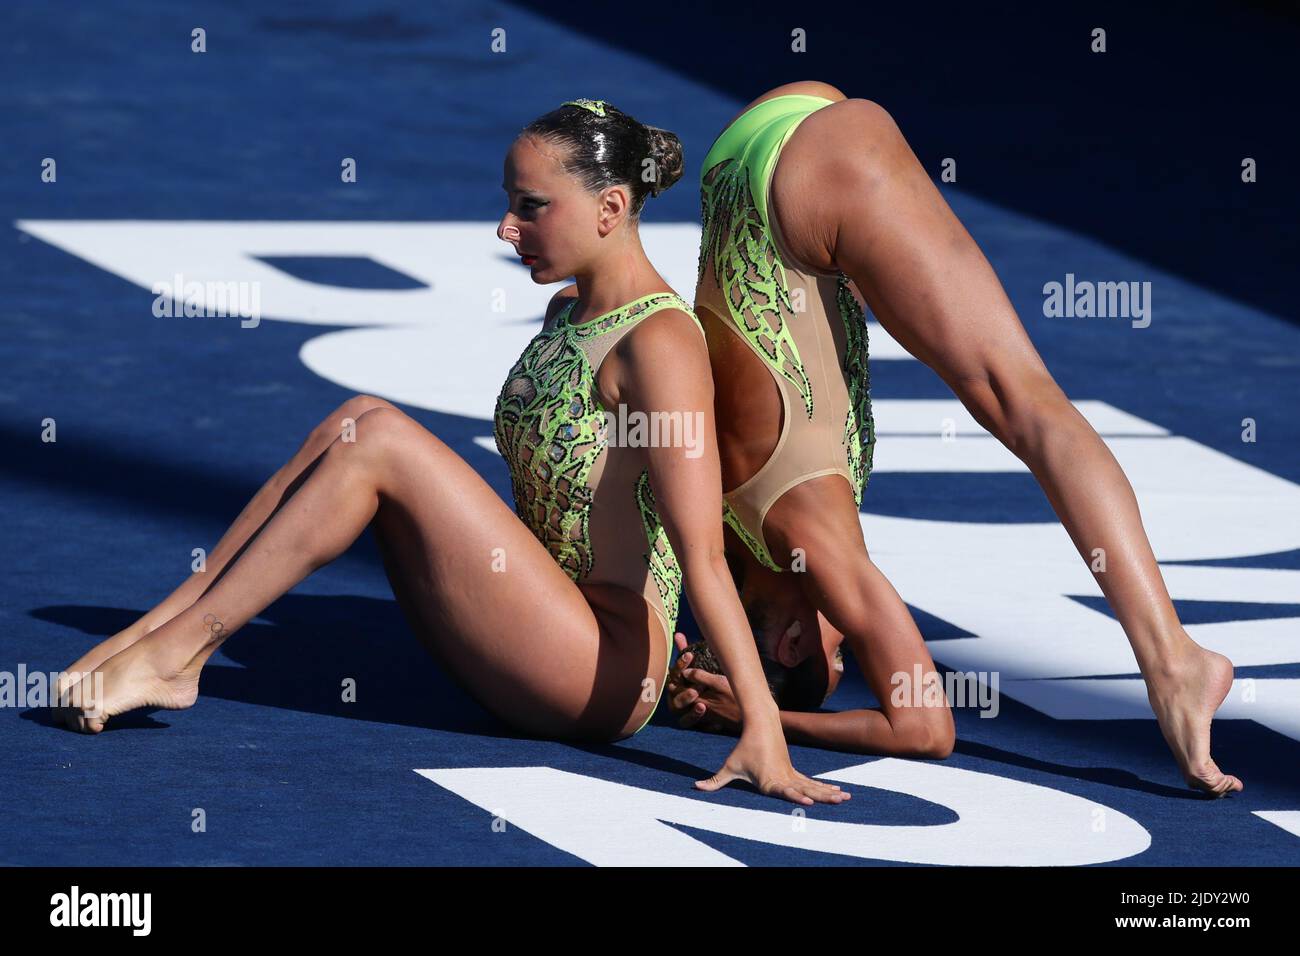 Budapest, Hungary. 23rd June, 2022. Linda Cerruti and Costanza Ferro of Italy compete during the Artistic Swimming Women Duet Free Final in Budapest, Hungary, June 23, 2022. Credit: Zheng Huansong/Xinhua/Alamy Live News Stock Photo